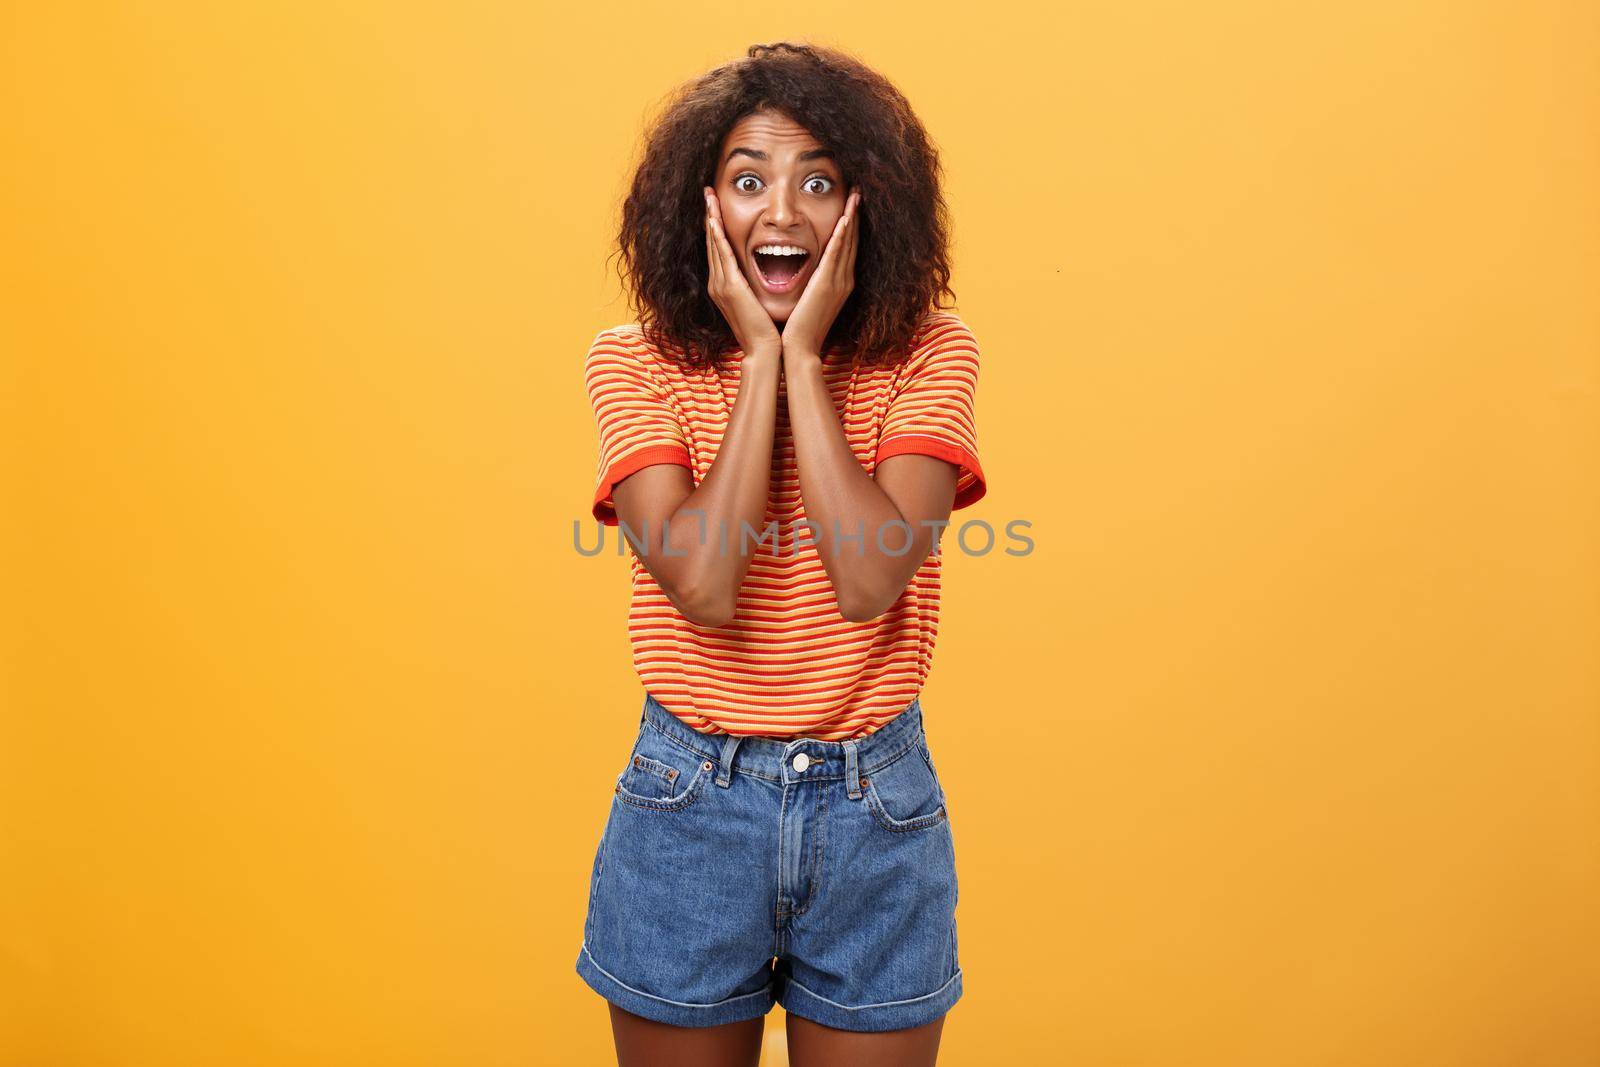 Impressed talkative african american woman finding out hot details of rumor being excited, thrilled leaning face on palms, smiling broadly with amused expression listening carefully over orange wall.